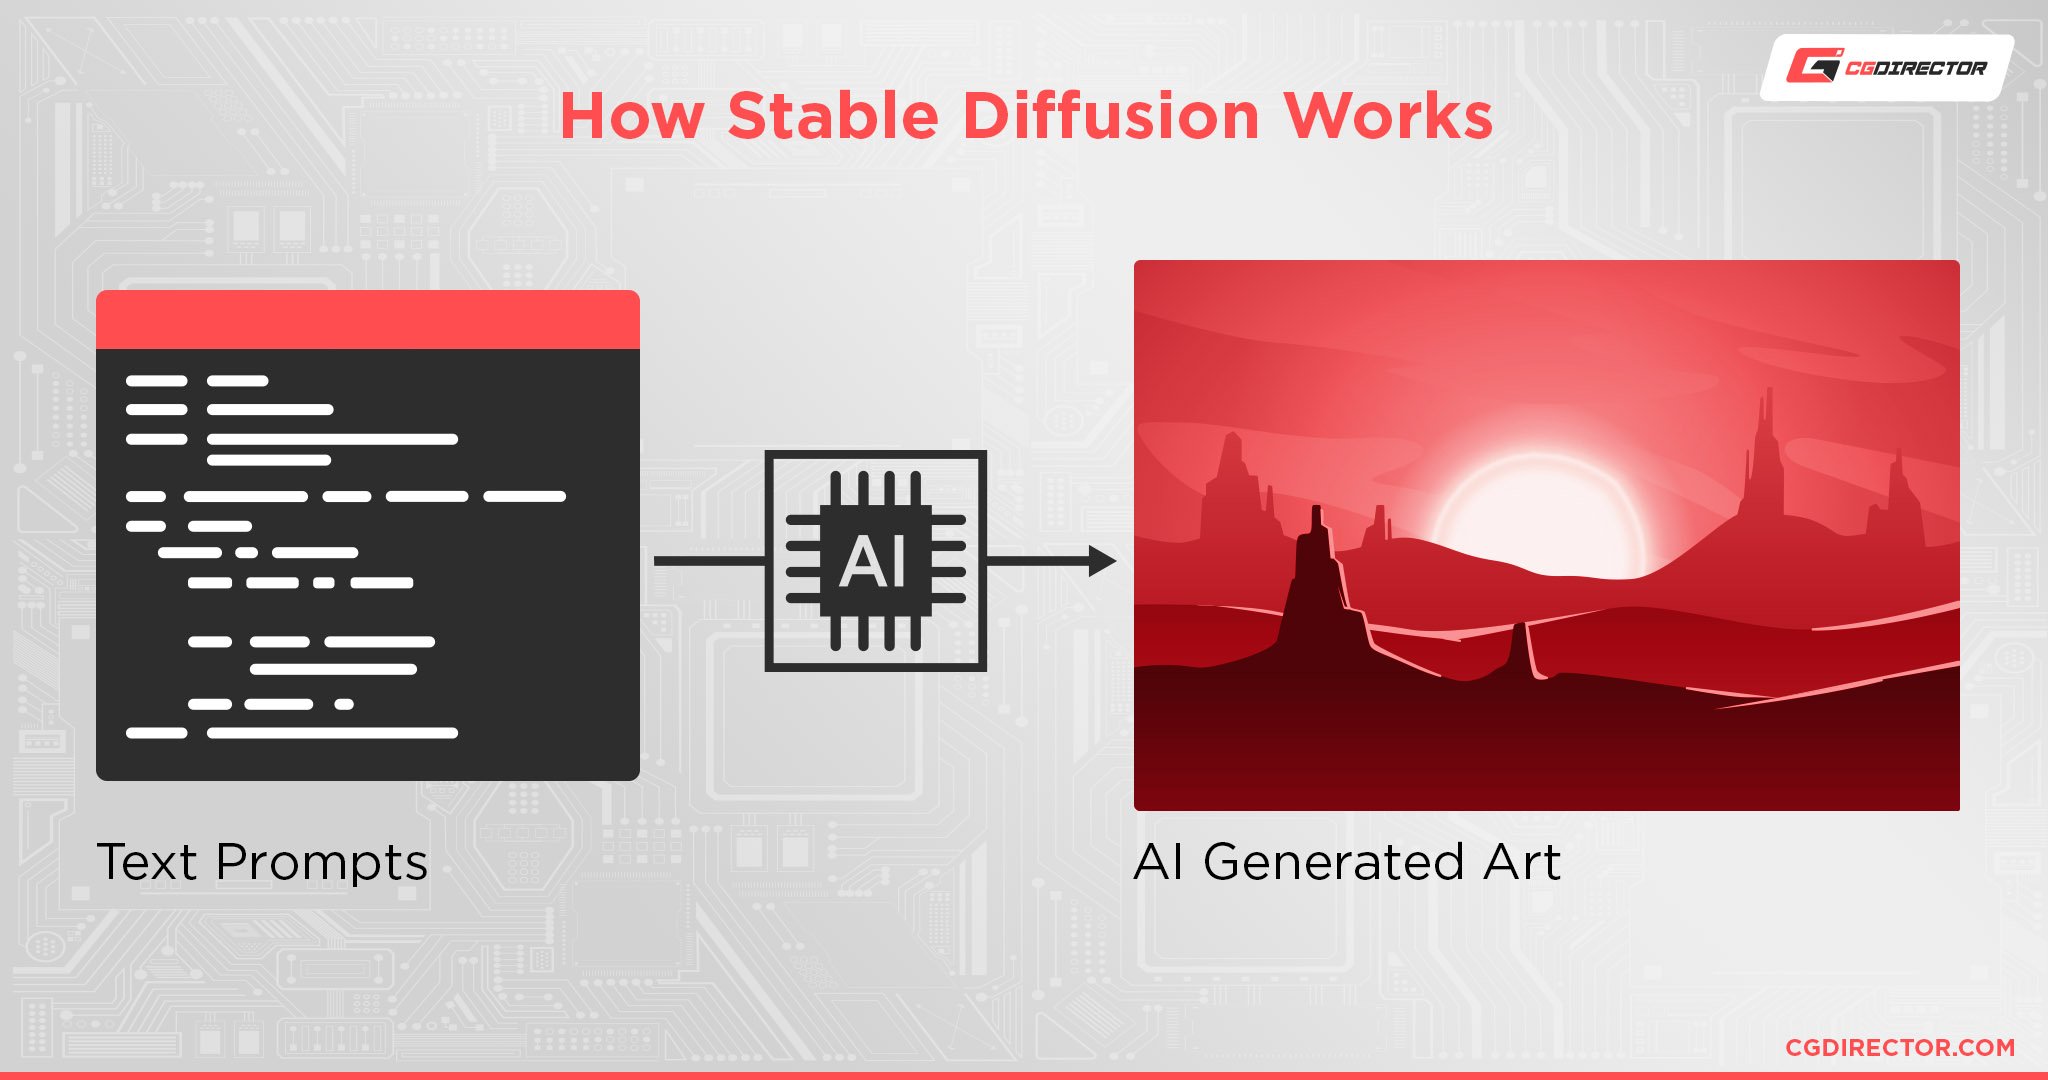 How Stable Diffusion Works